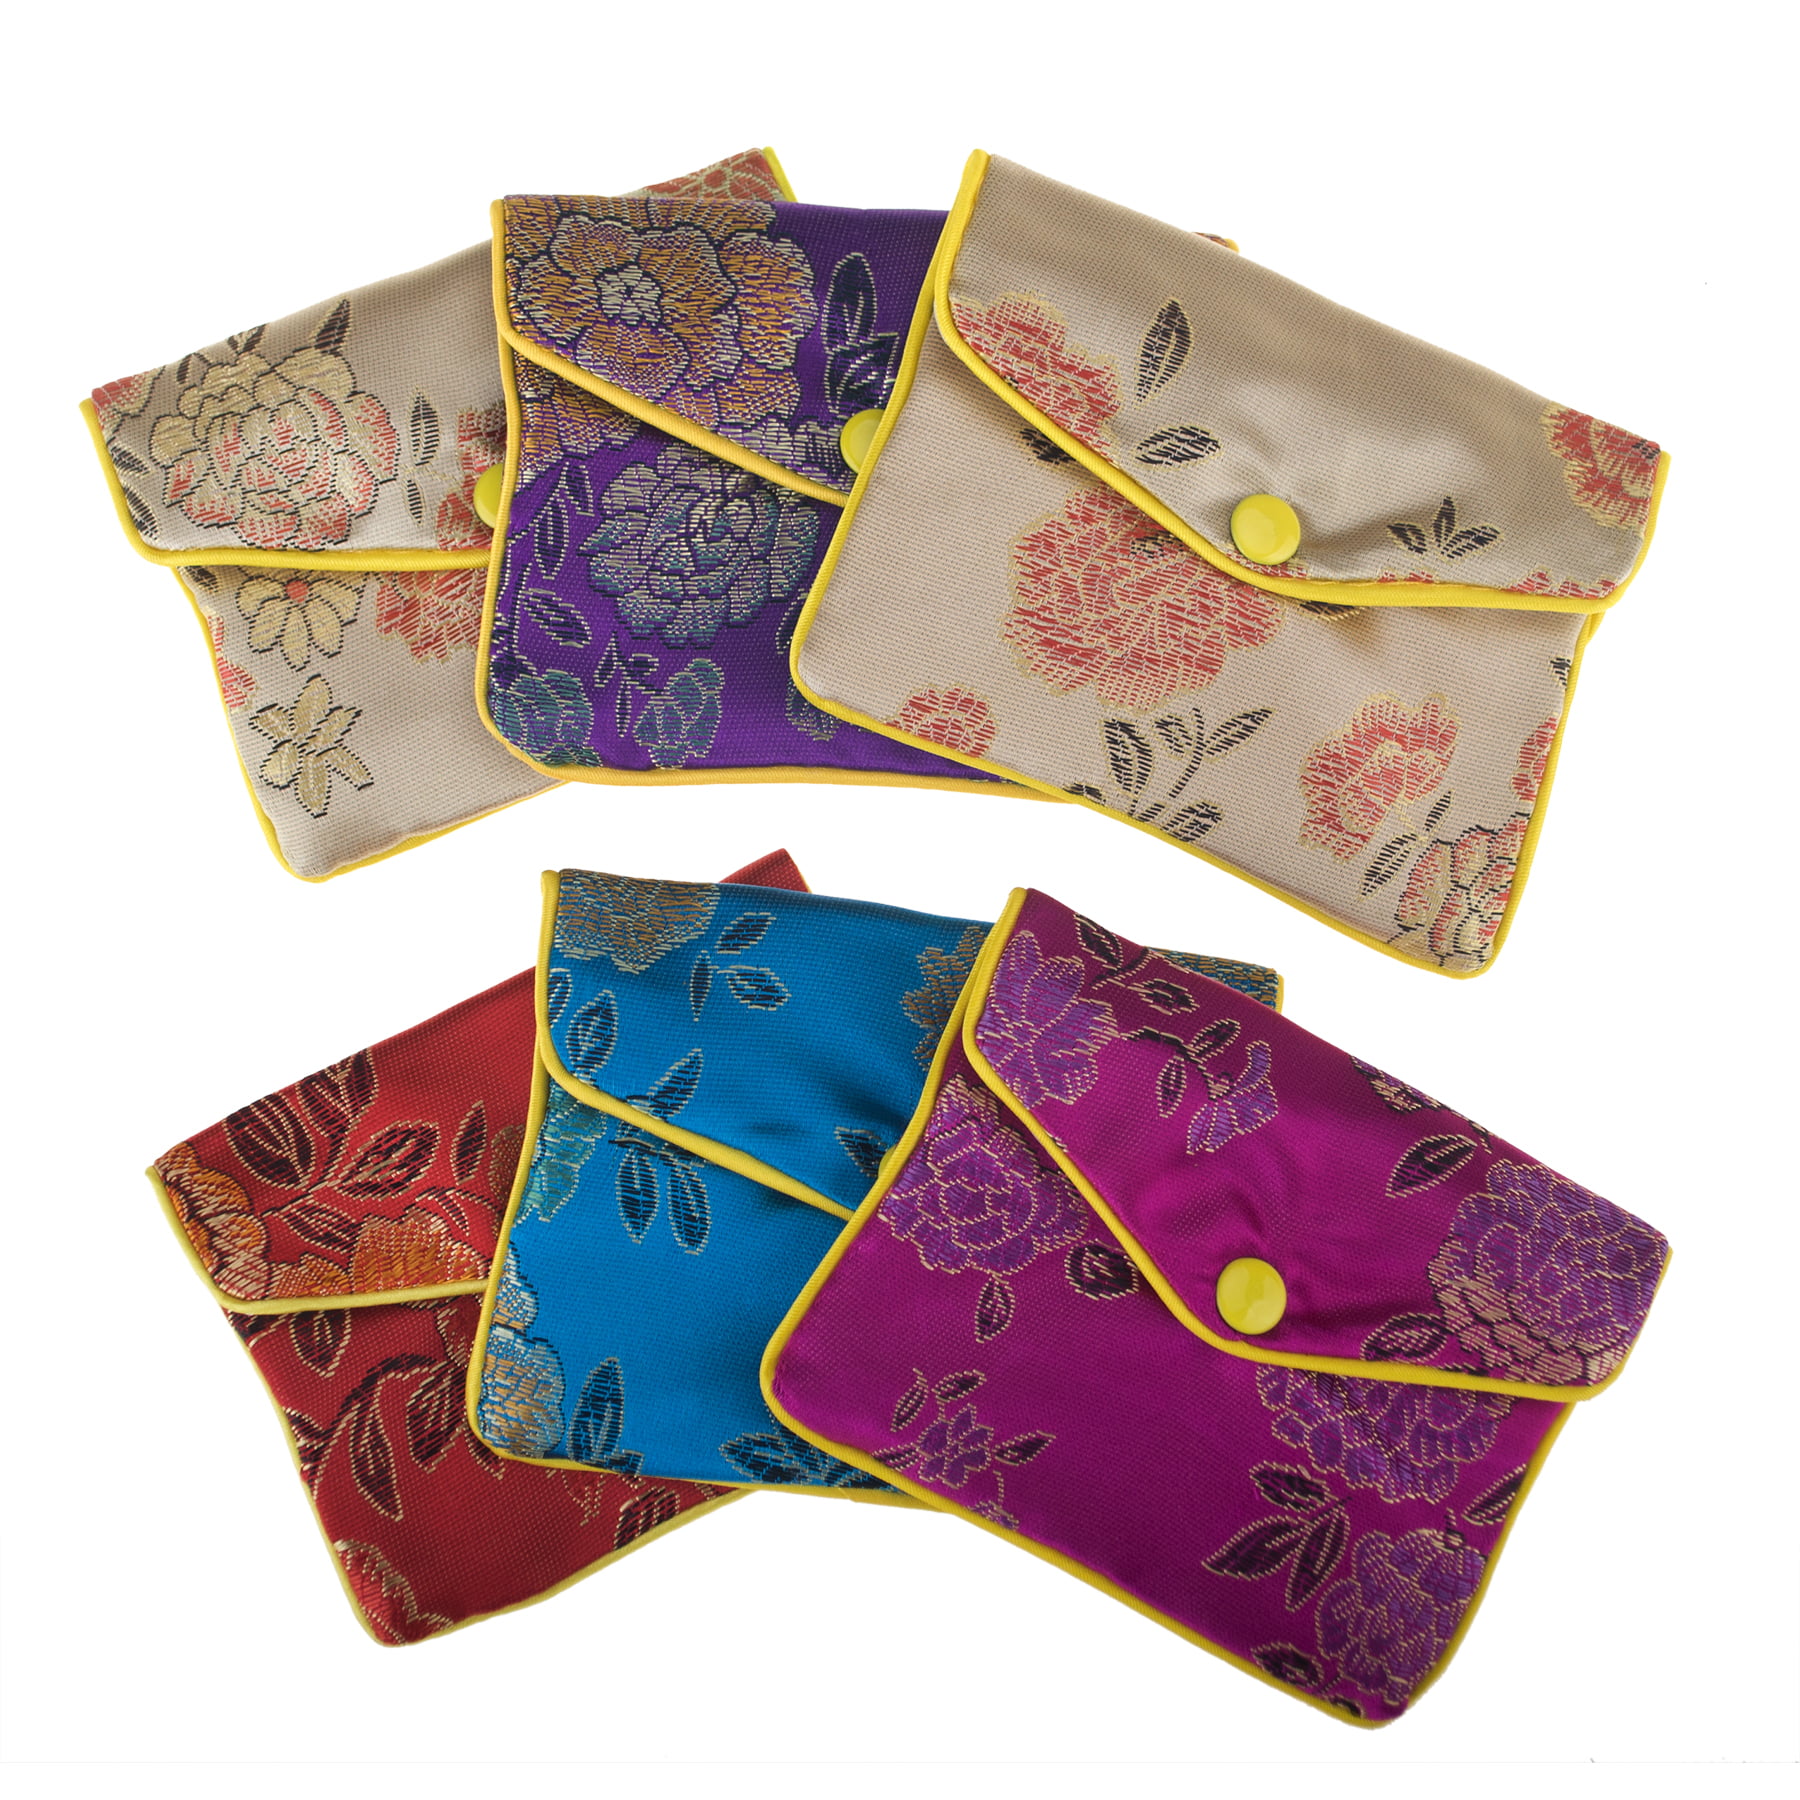 6 Pcs 3 Color Chinese Jewelry Purse Pouches with Zipper 4" x 5" 6 Piece pack